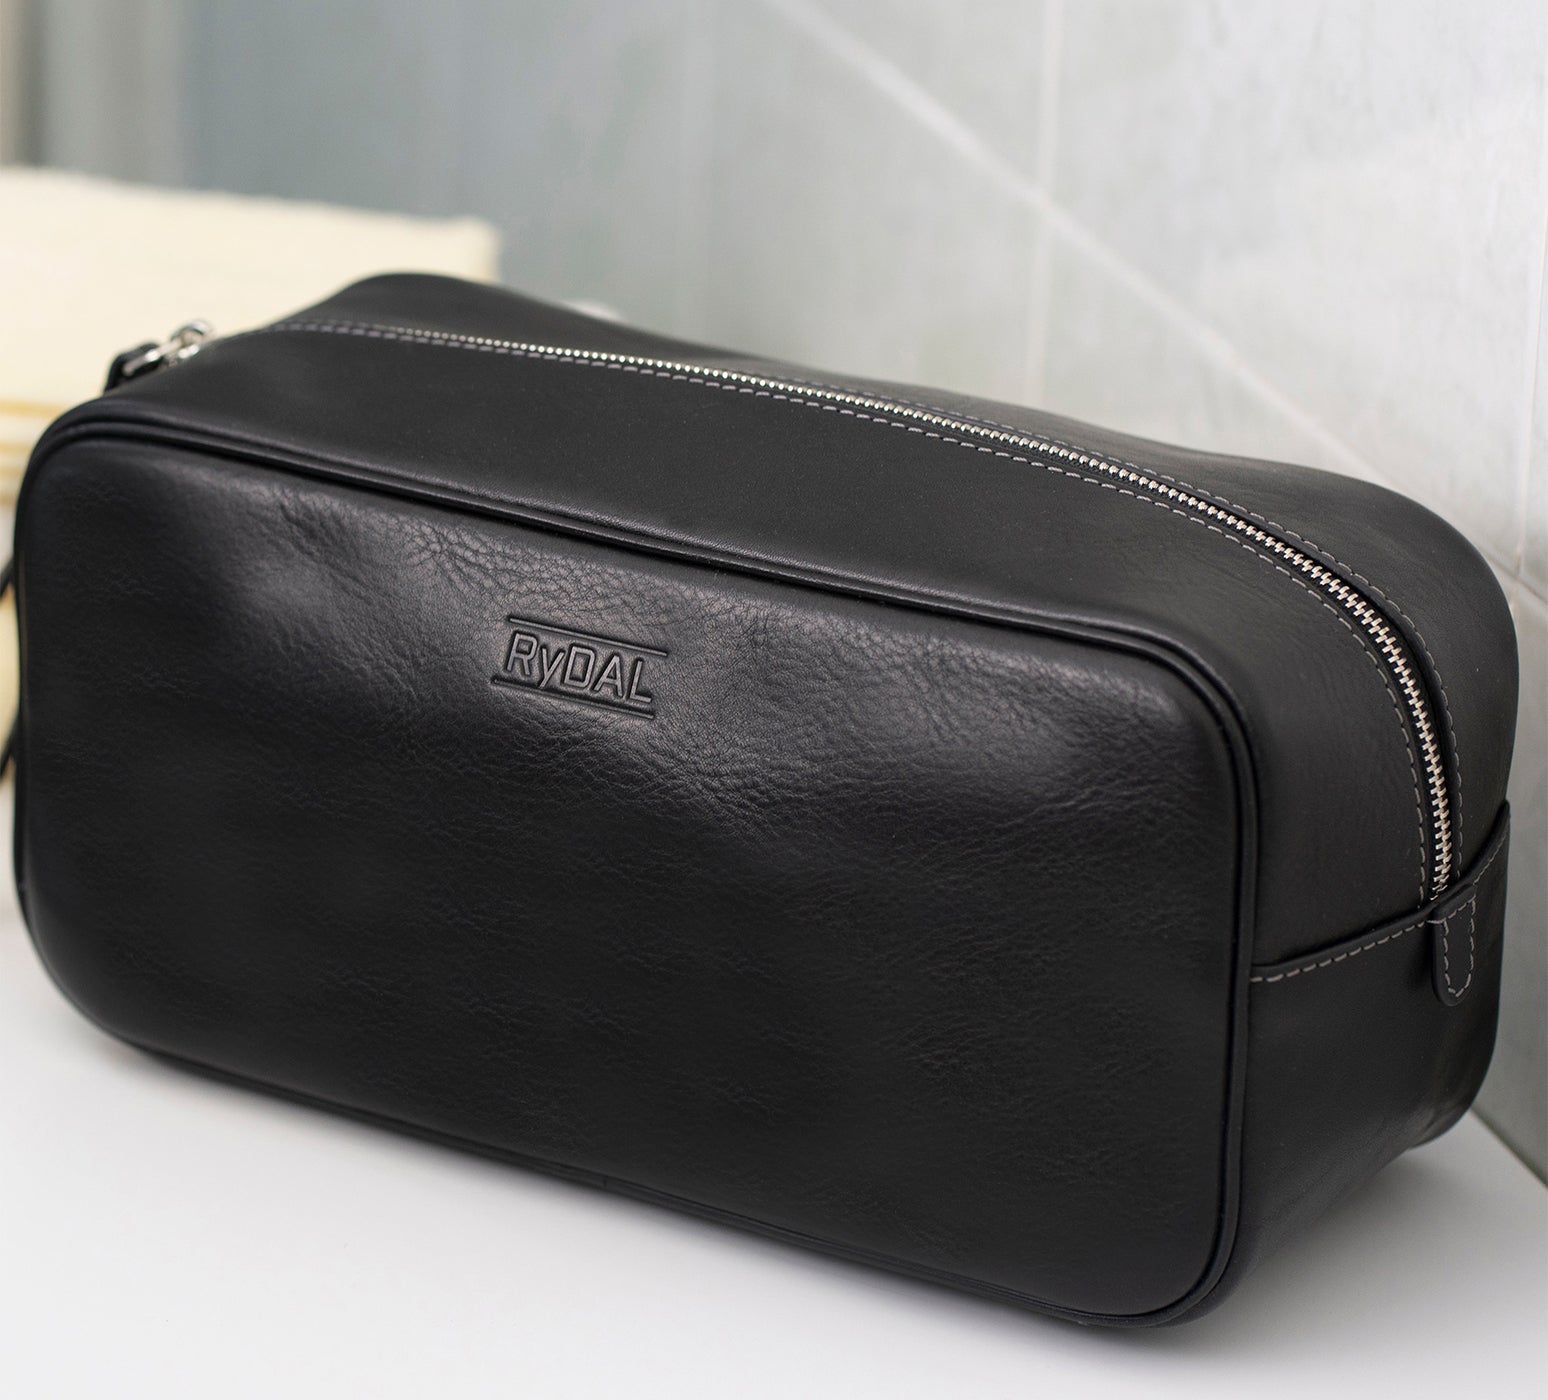 Mens Leather Wash Bag from Rydal in 'Black' in use.